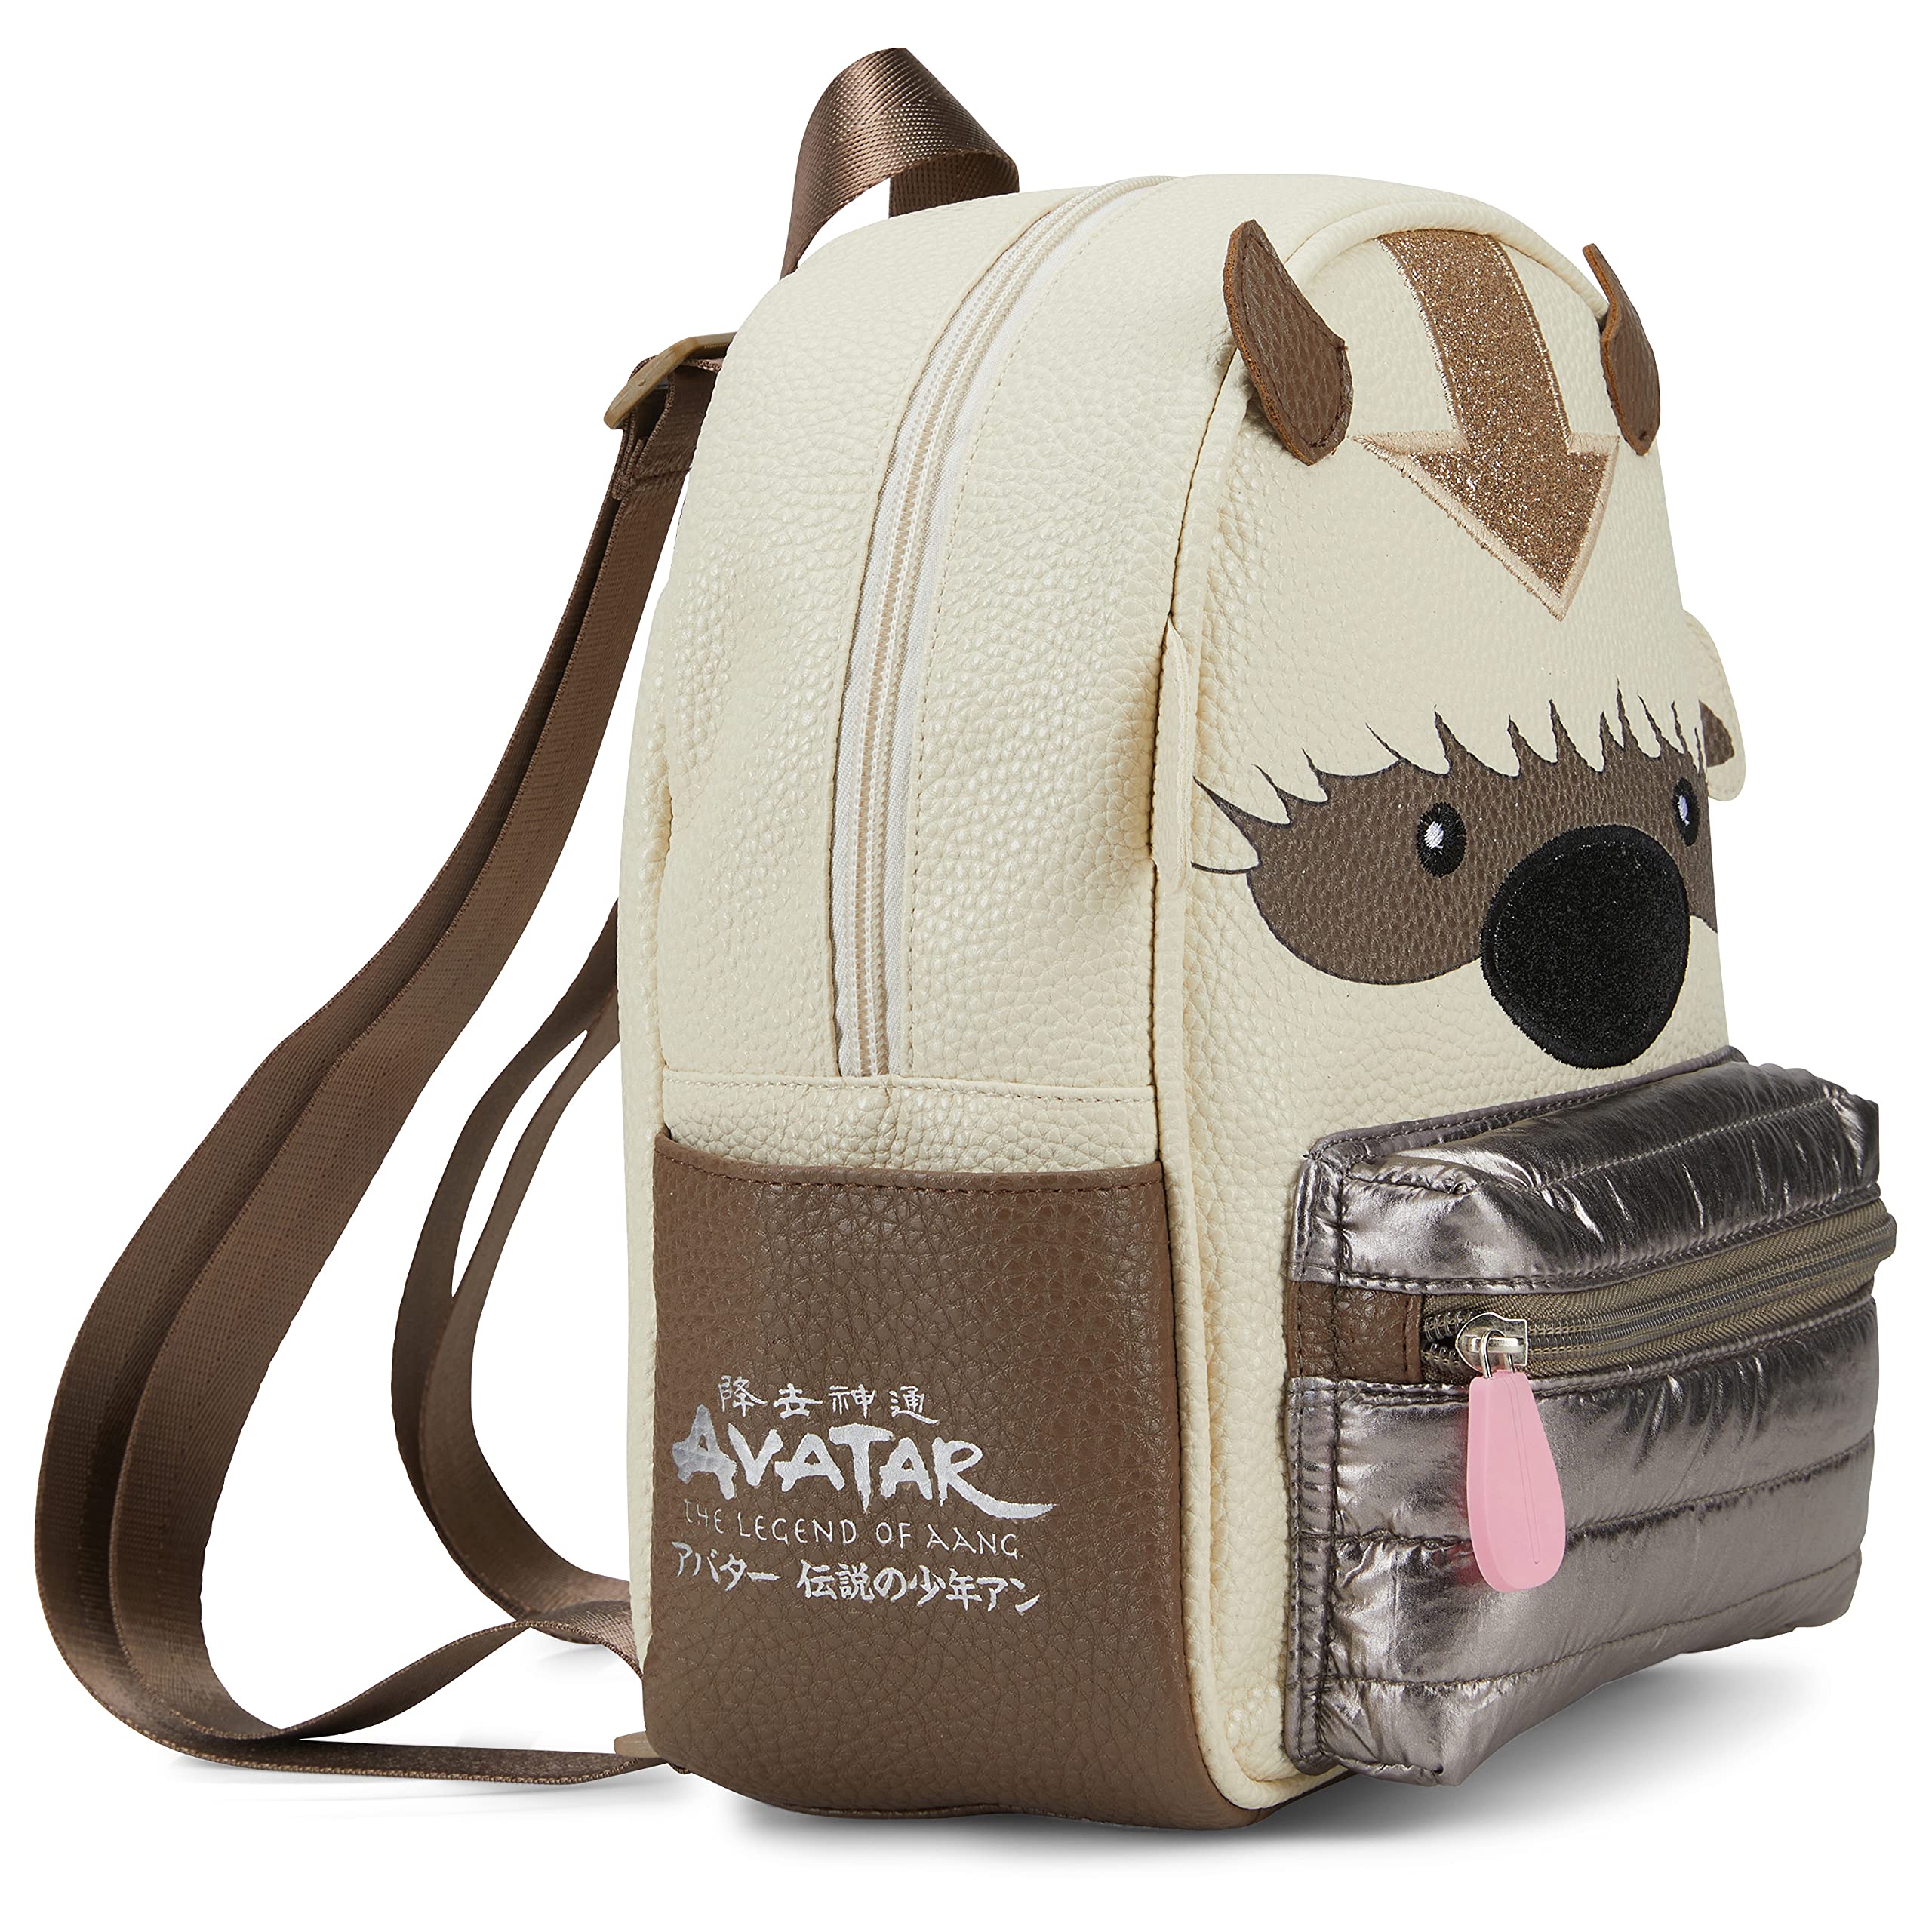 AI ACCESSORY INNOVATIONS AVATAR THE LAST AIRBENDER 3D Backpack Purse